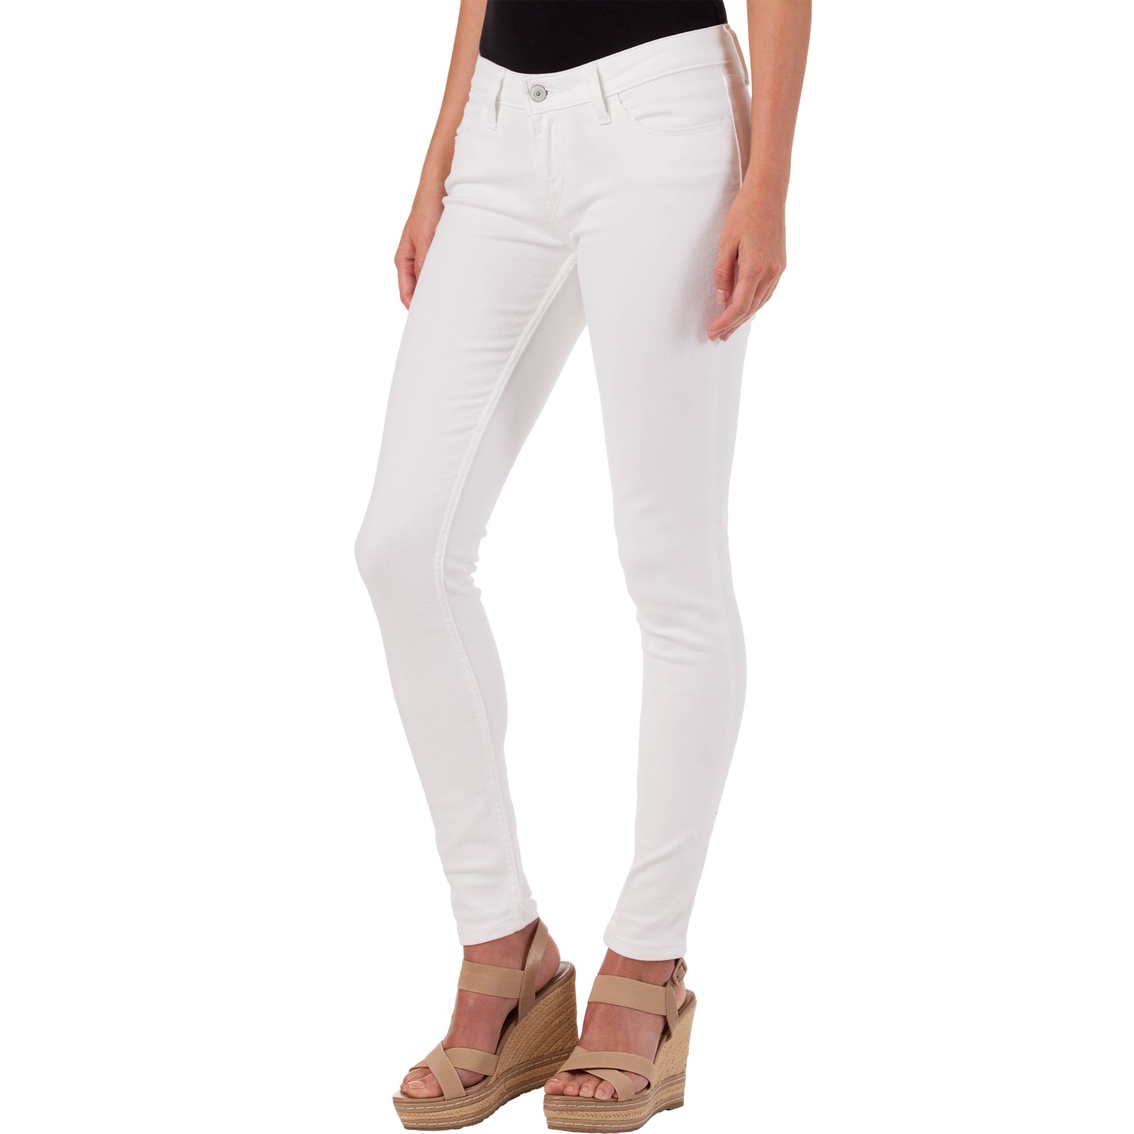 535 Super Skinny Jeans, White | Jeans | Clothing & Shop The Exchange